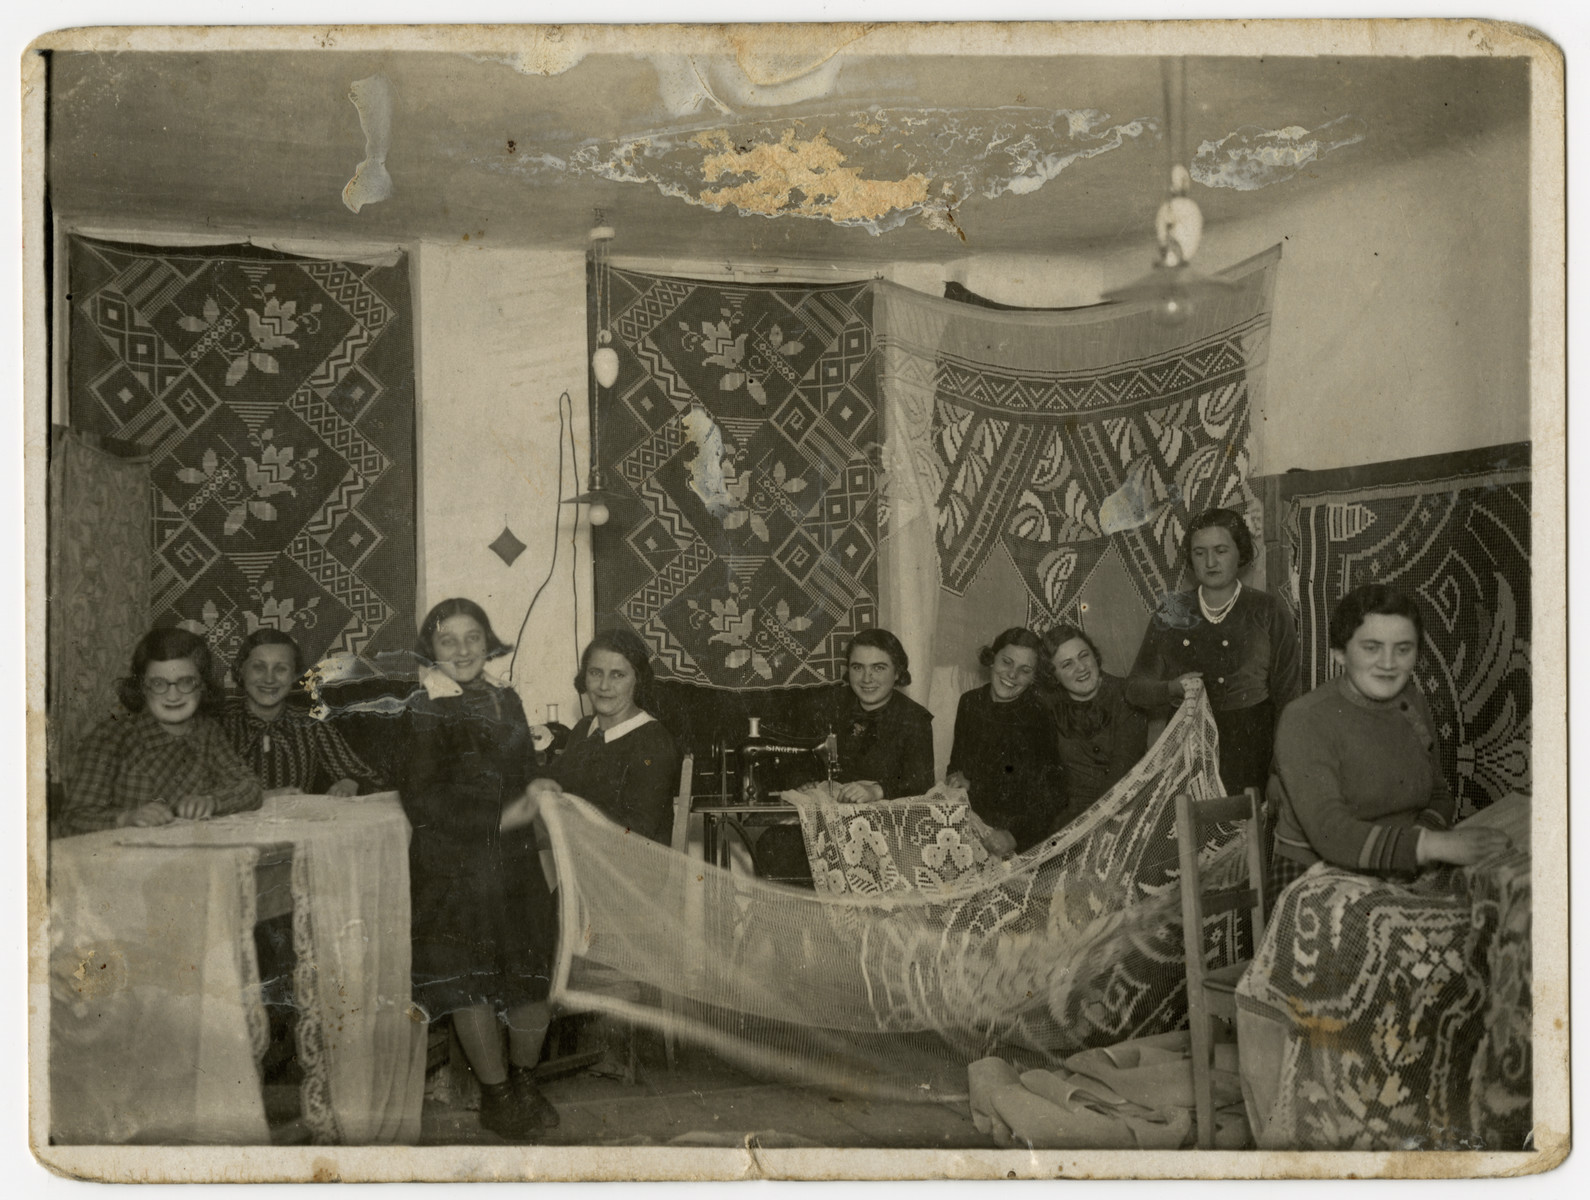 A group of Beit Yaakov women sew lace curtains in Rymanow, Poland.  Pictured at the right is the donor's mother, Sara Ginsburg Keller.